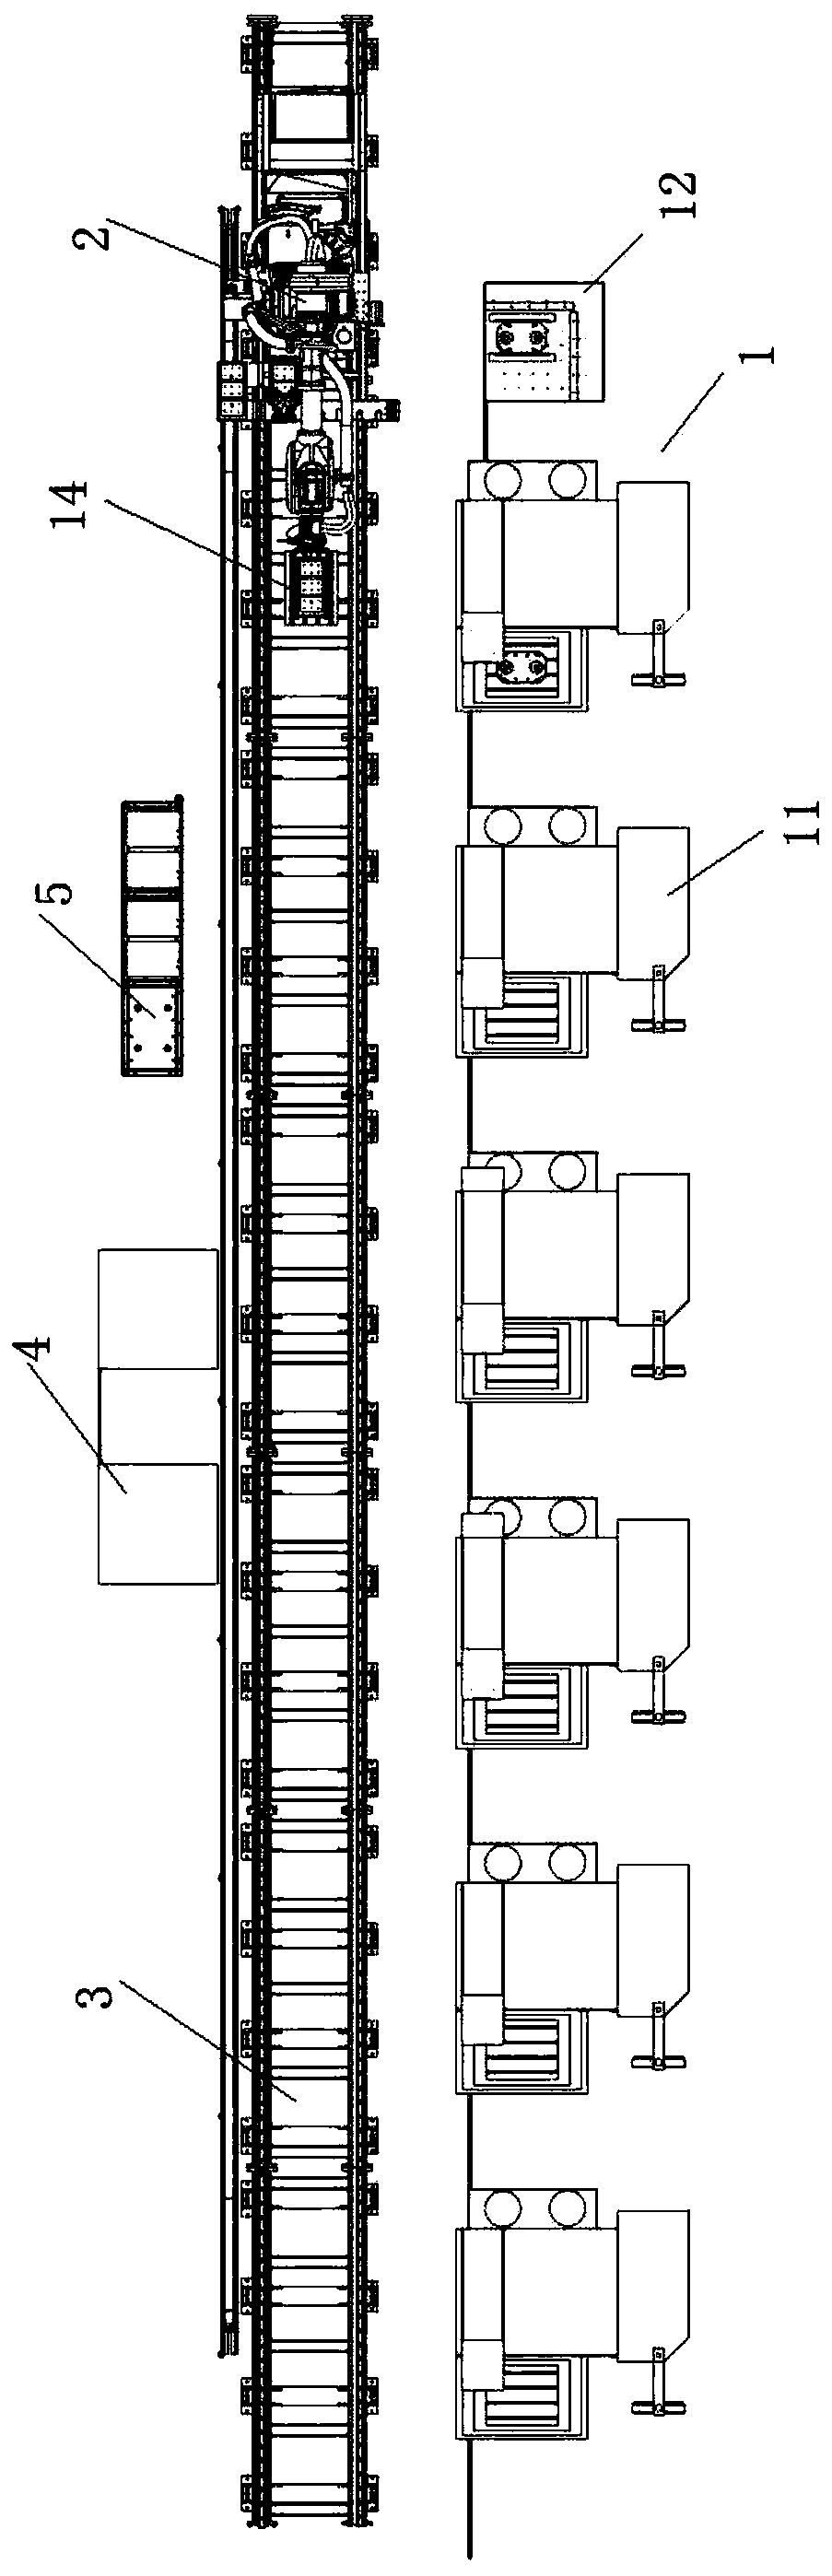 An electrical discharge machining device, system and method